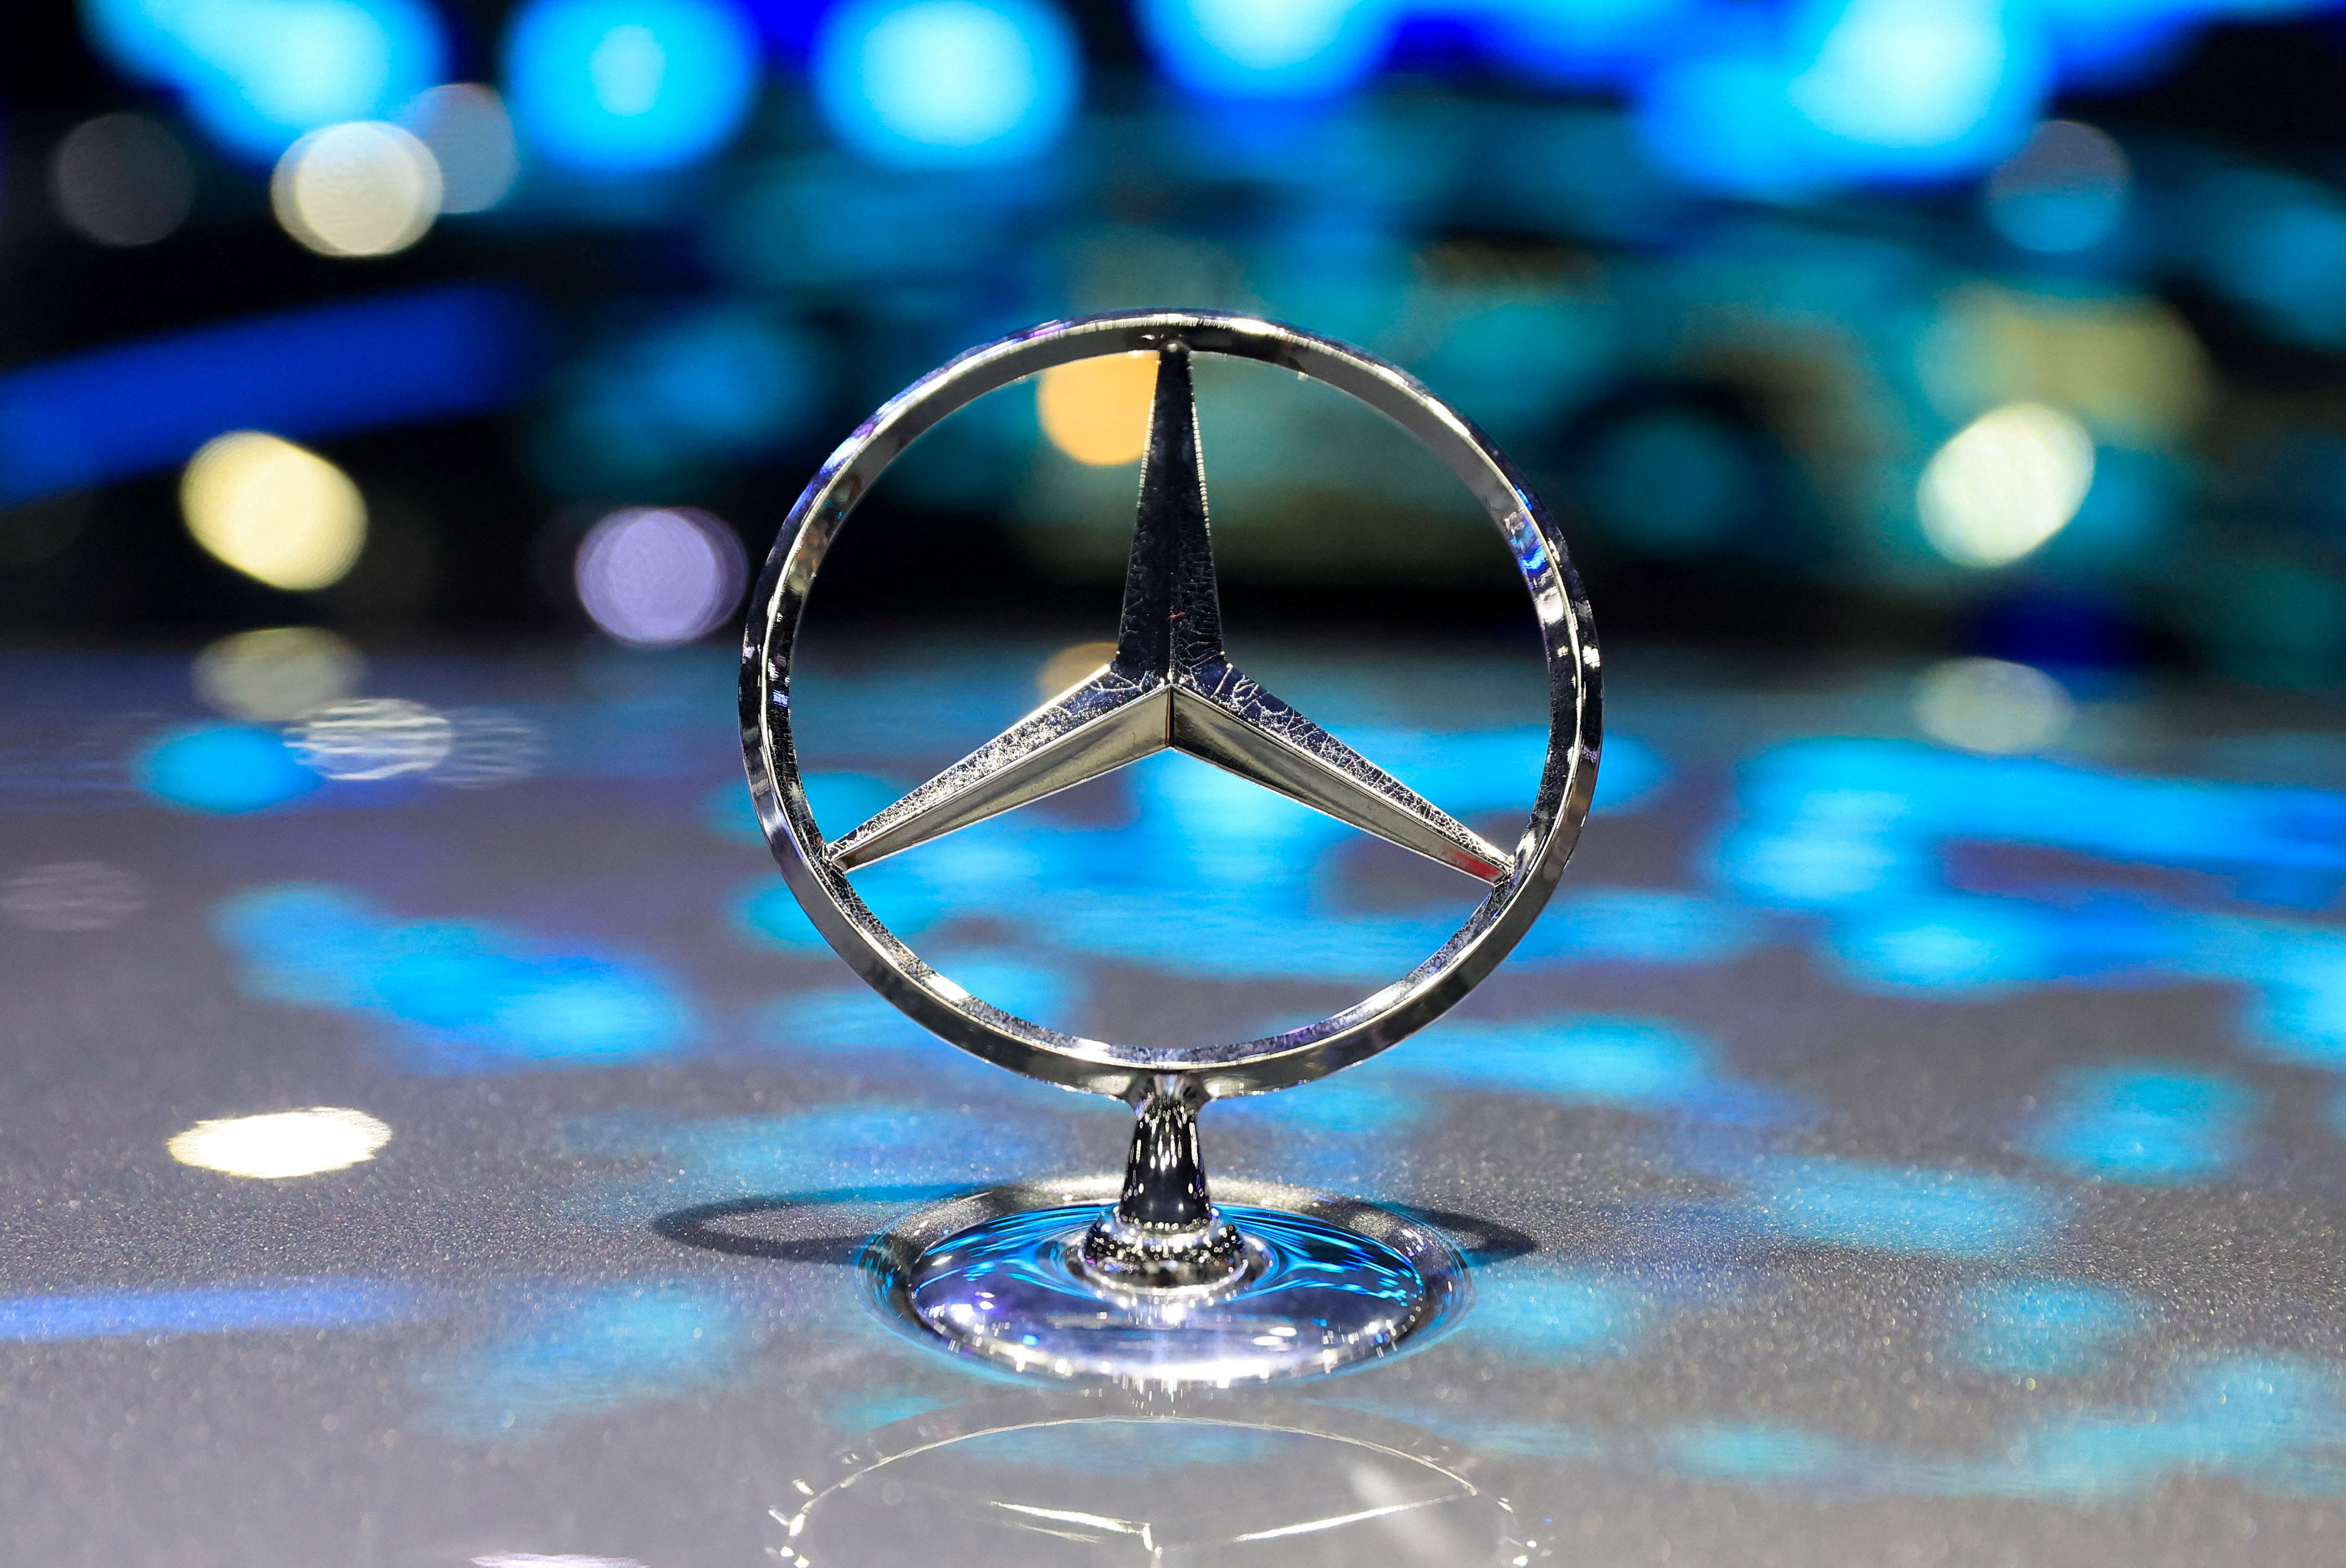 Mercedes: confirms to double electric motor capacity at Untertuerkheim |  Reuters